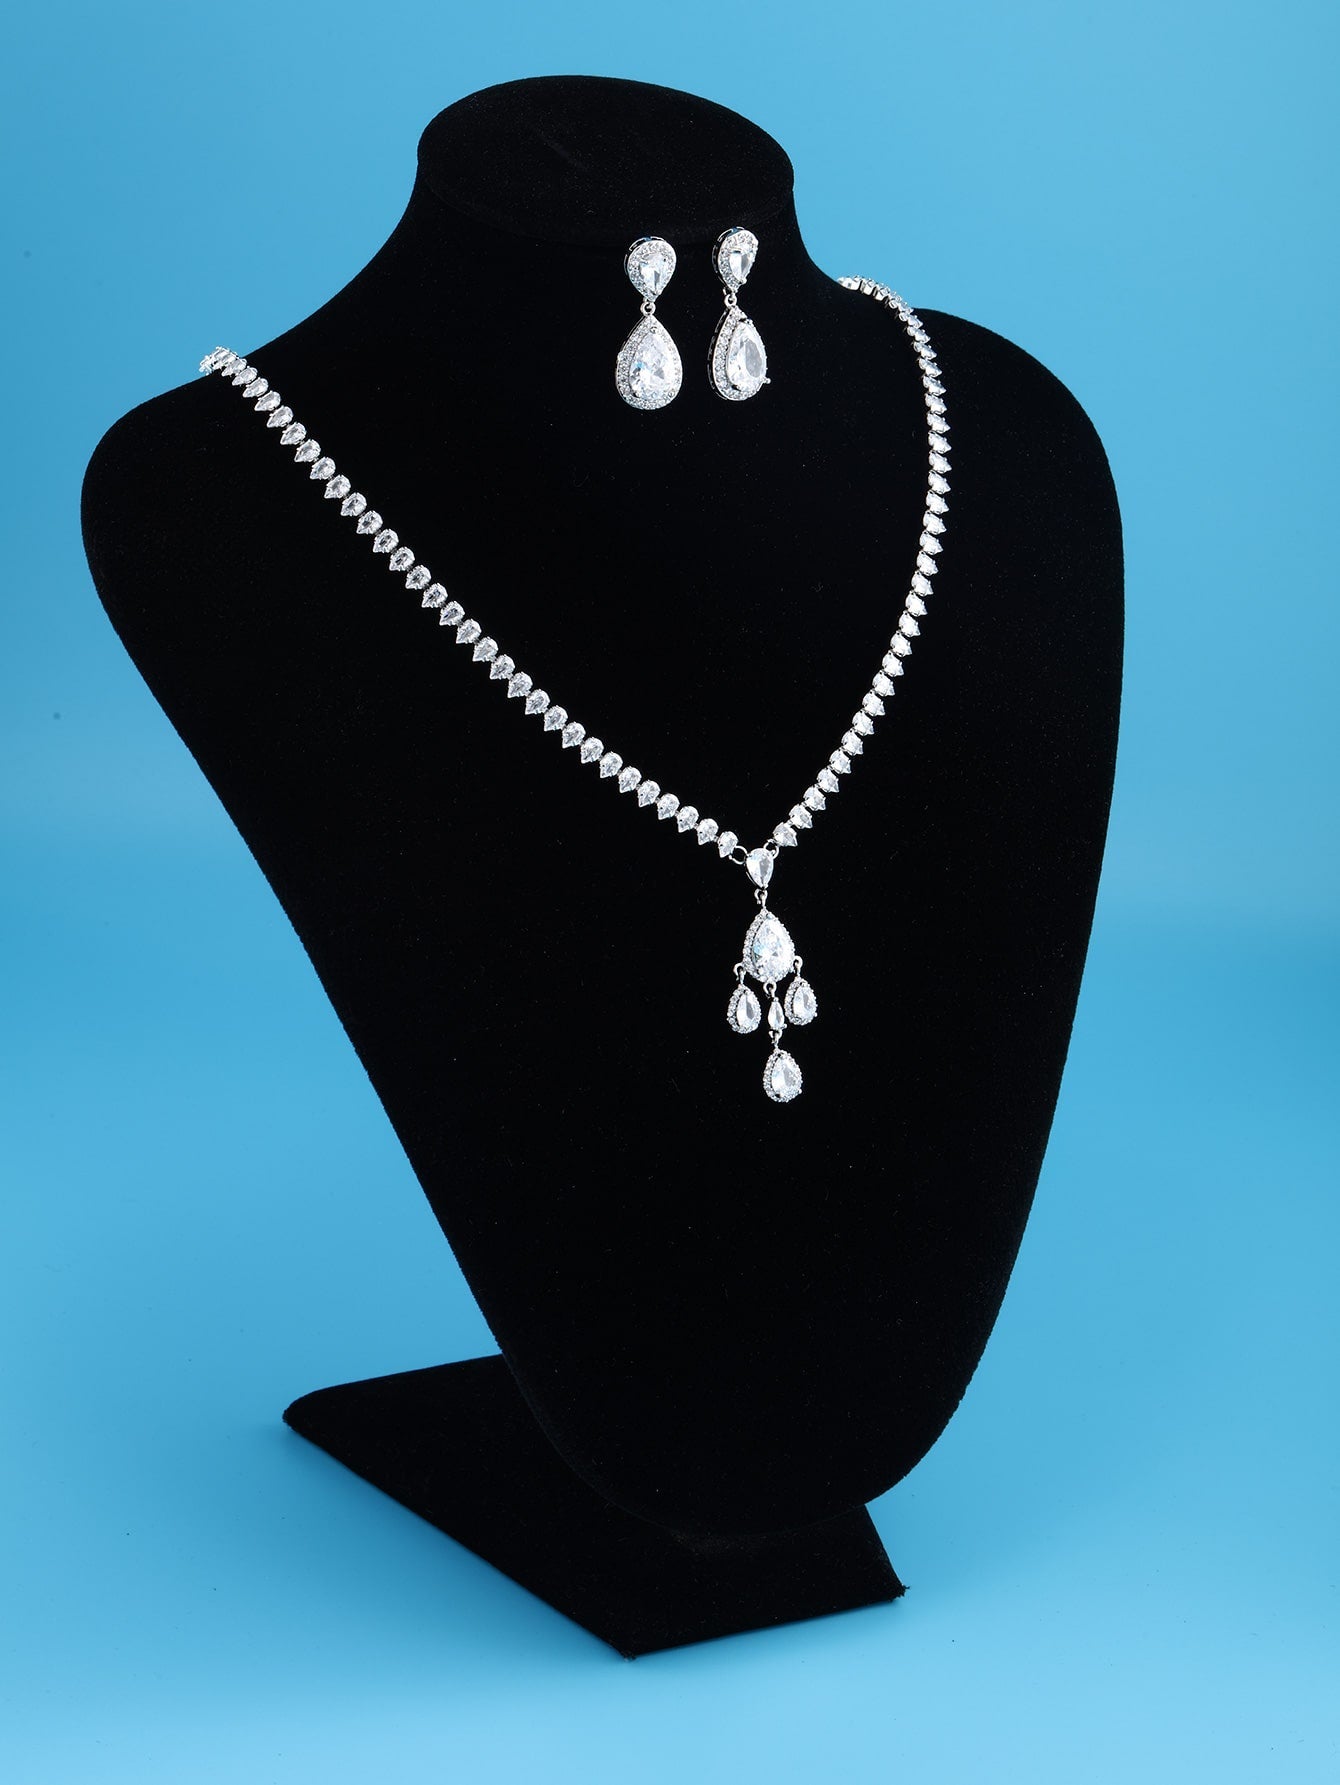 Stunning drop earrings & necklace set - JuVons